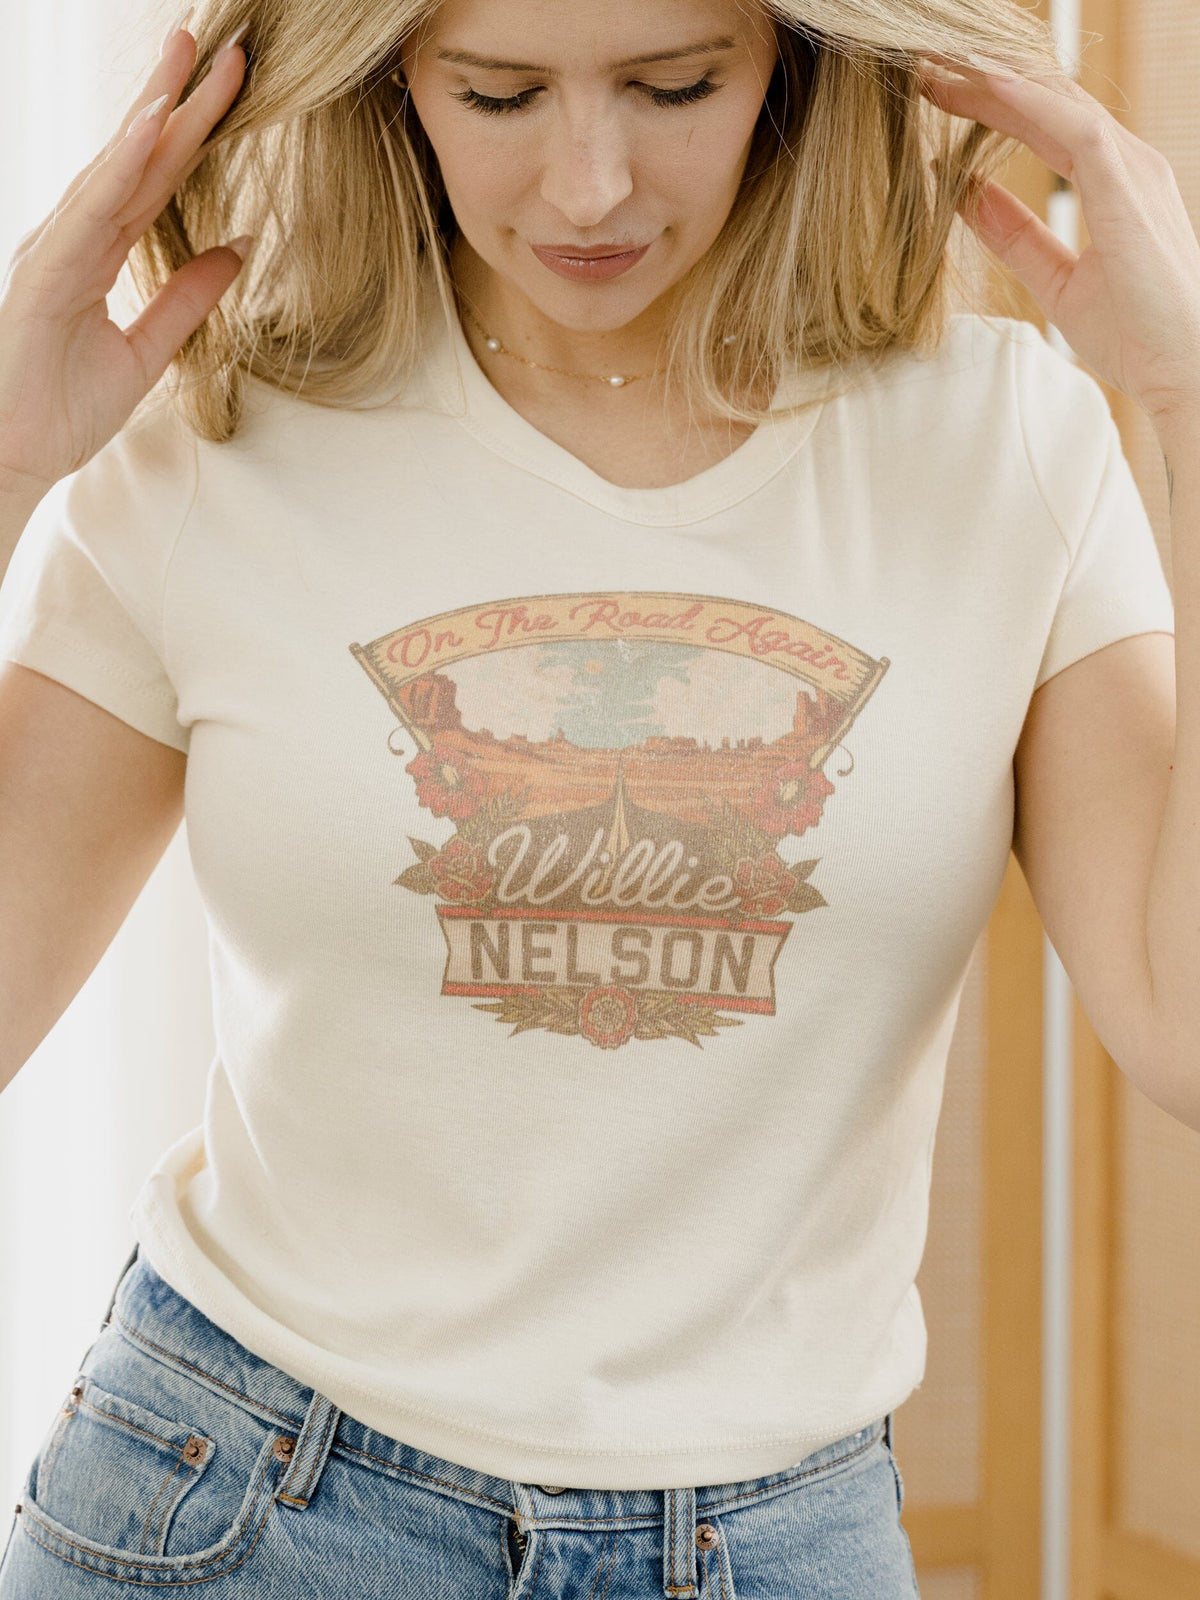 Willie Nelson OTR Highway Off White Micro Cropped Tee